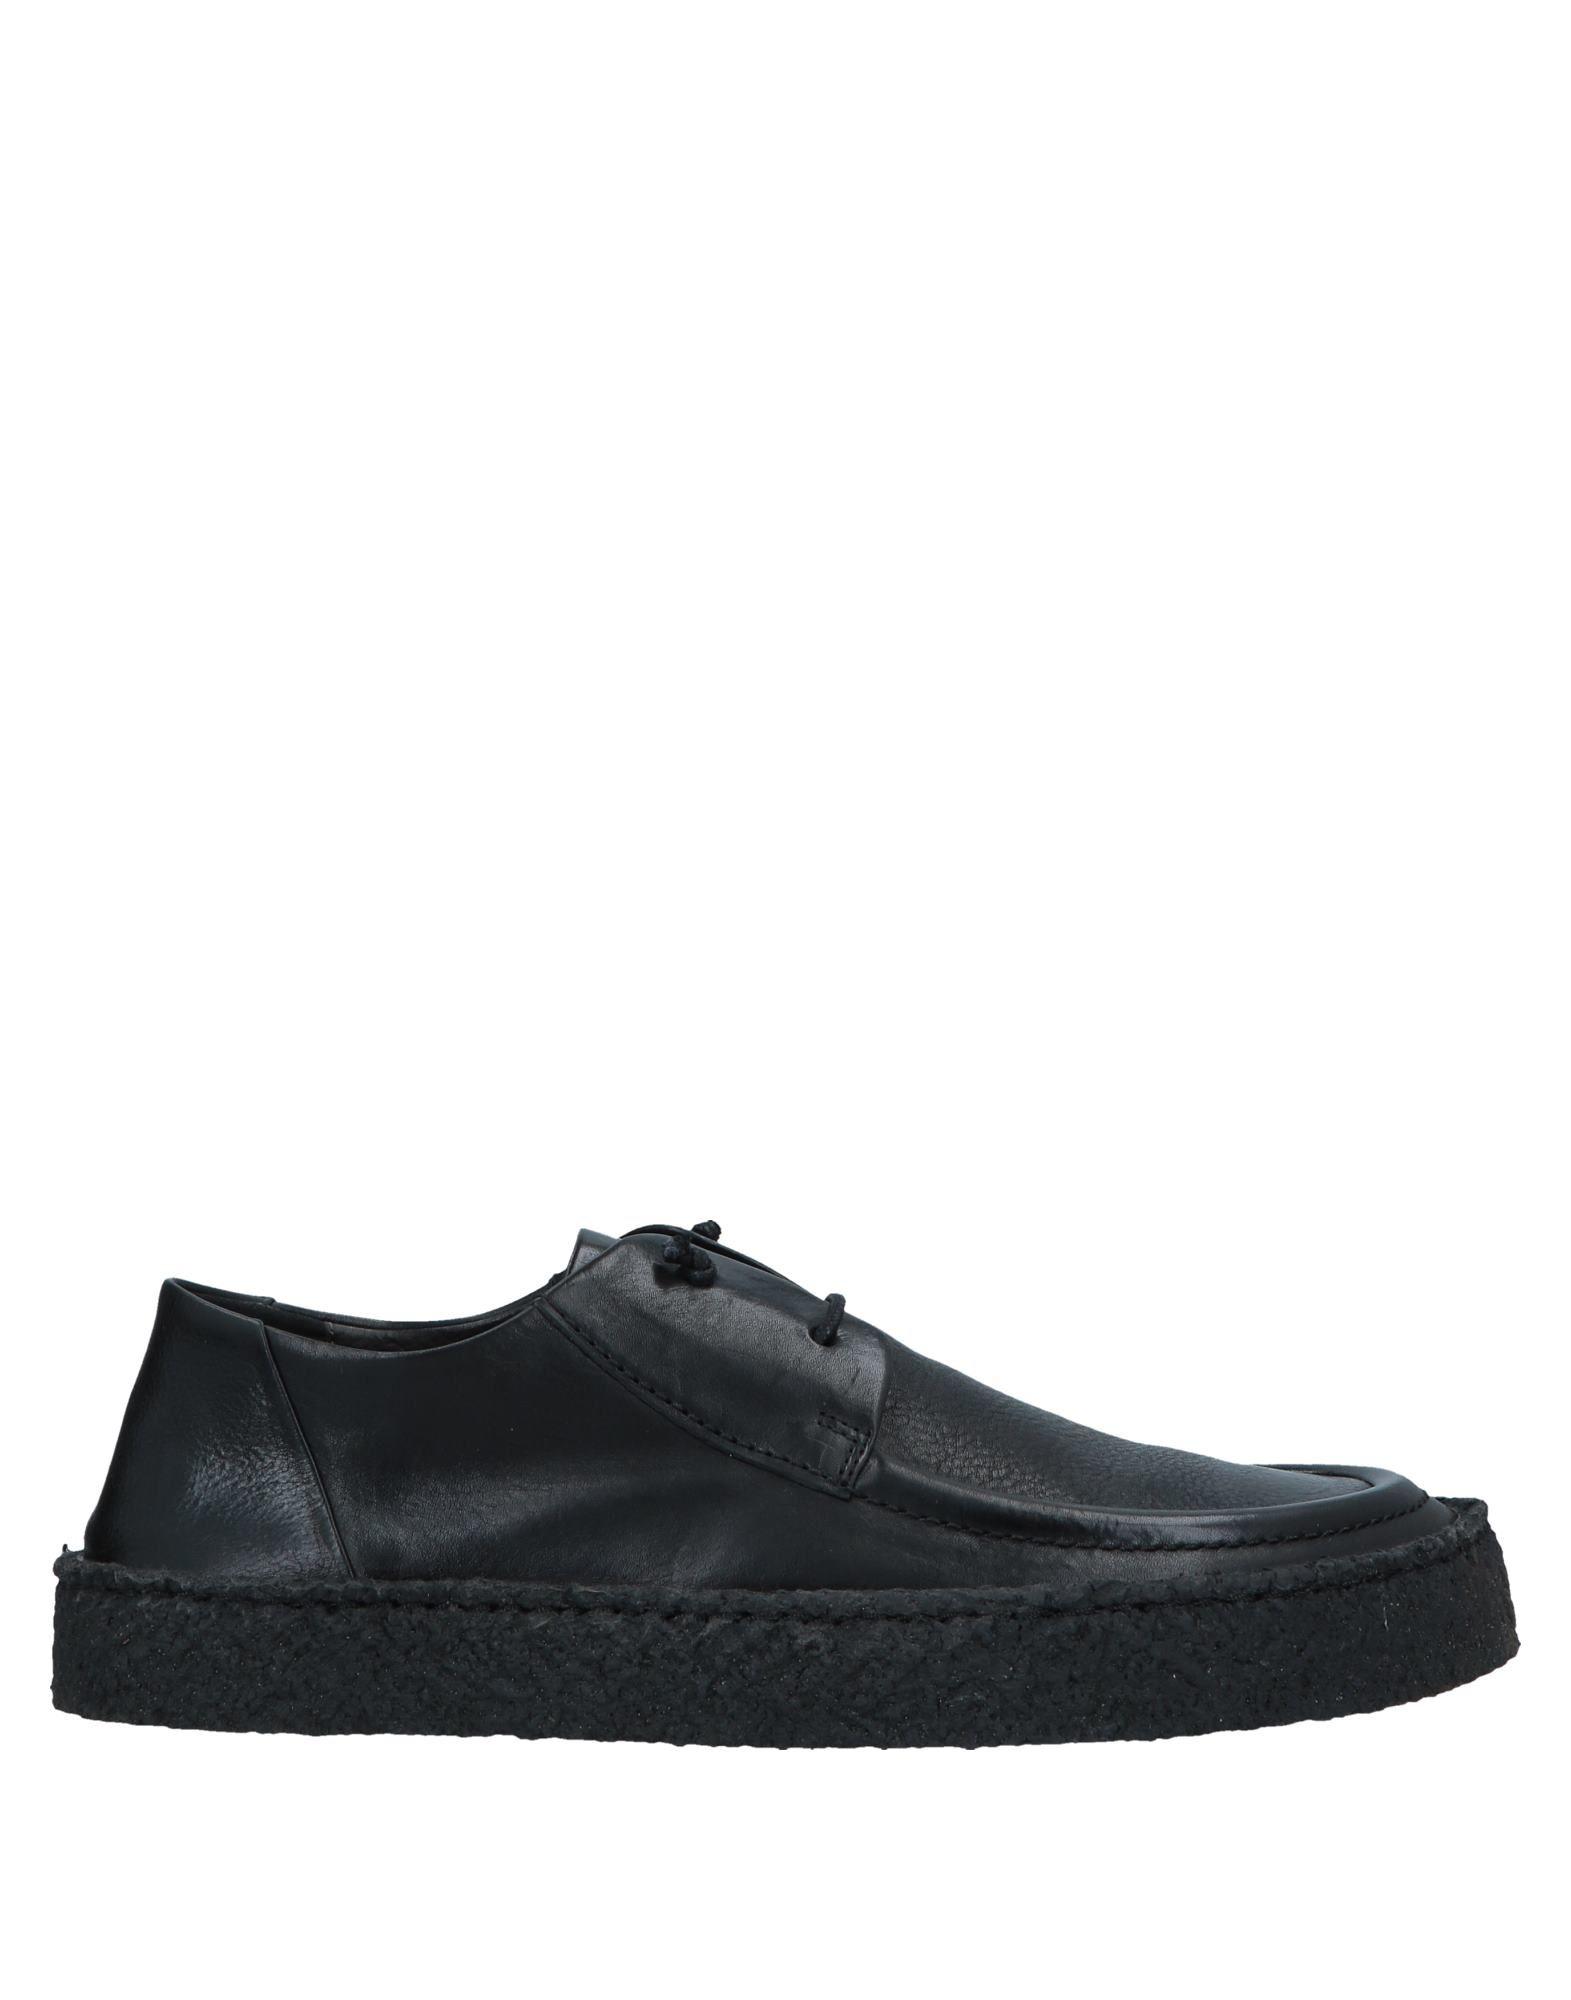 Marsèll Lace-up Shoe in Black for Men - Lyst